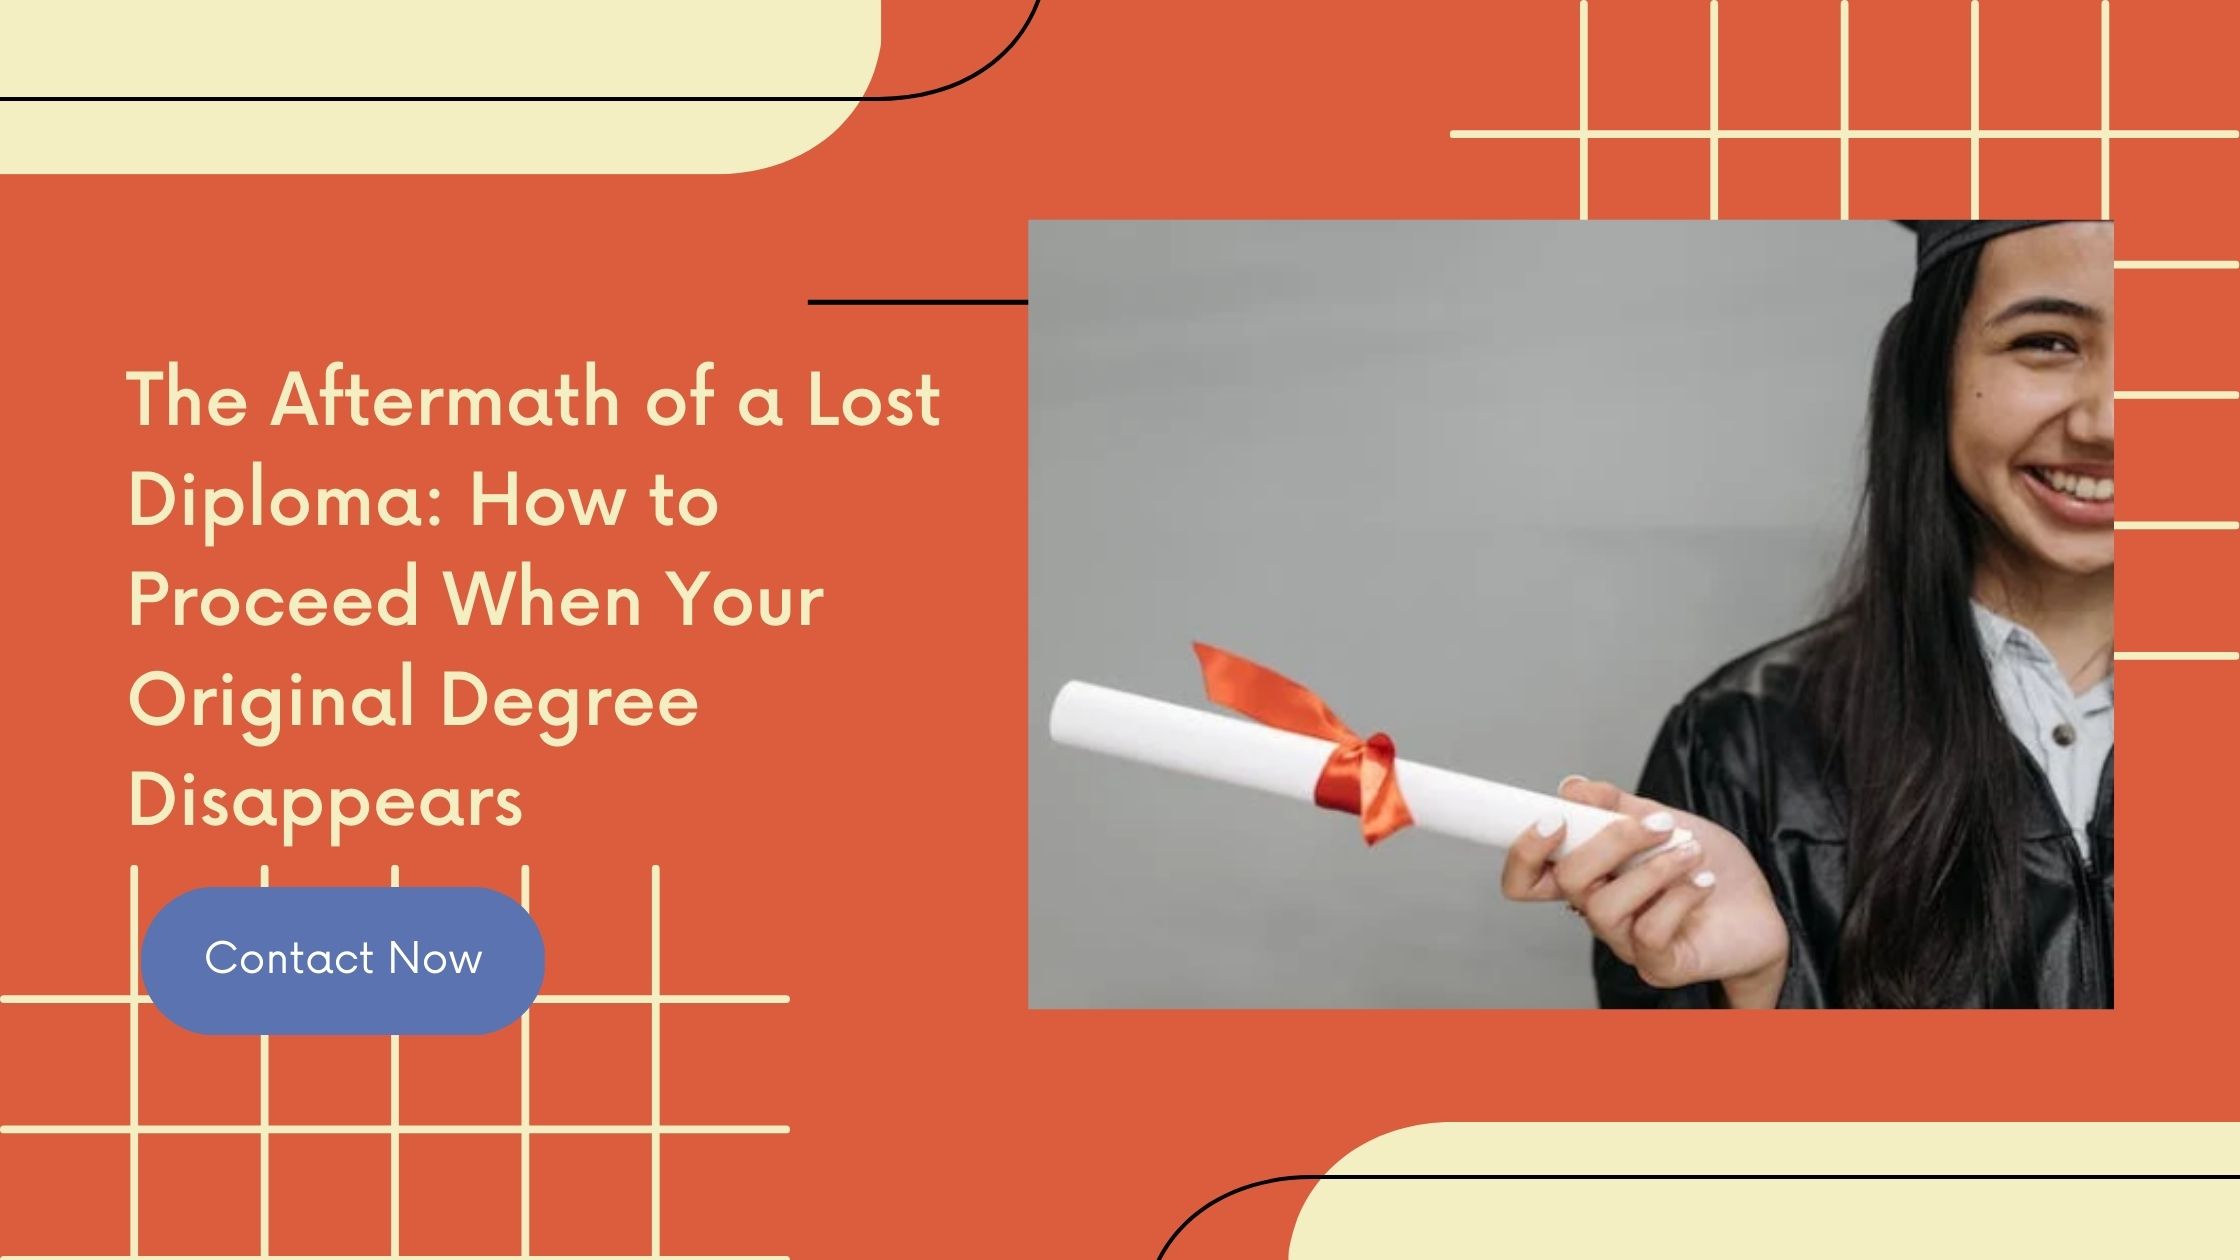 The Aftermath of a Lost Diploma How to Proceed When Your Original Degree Disappears